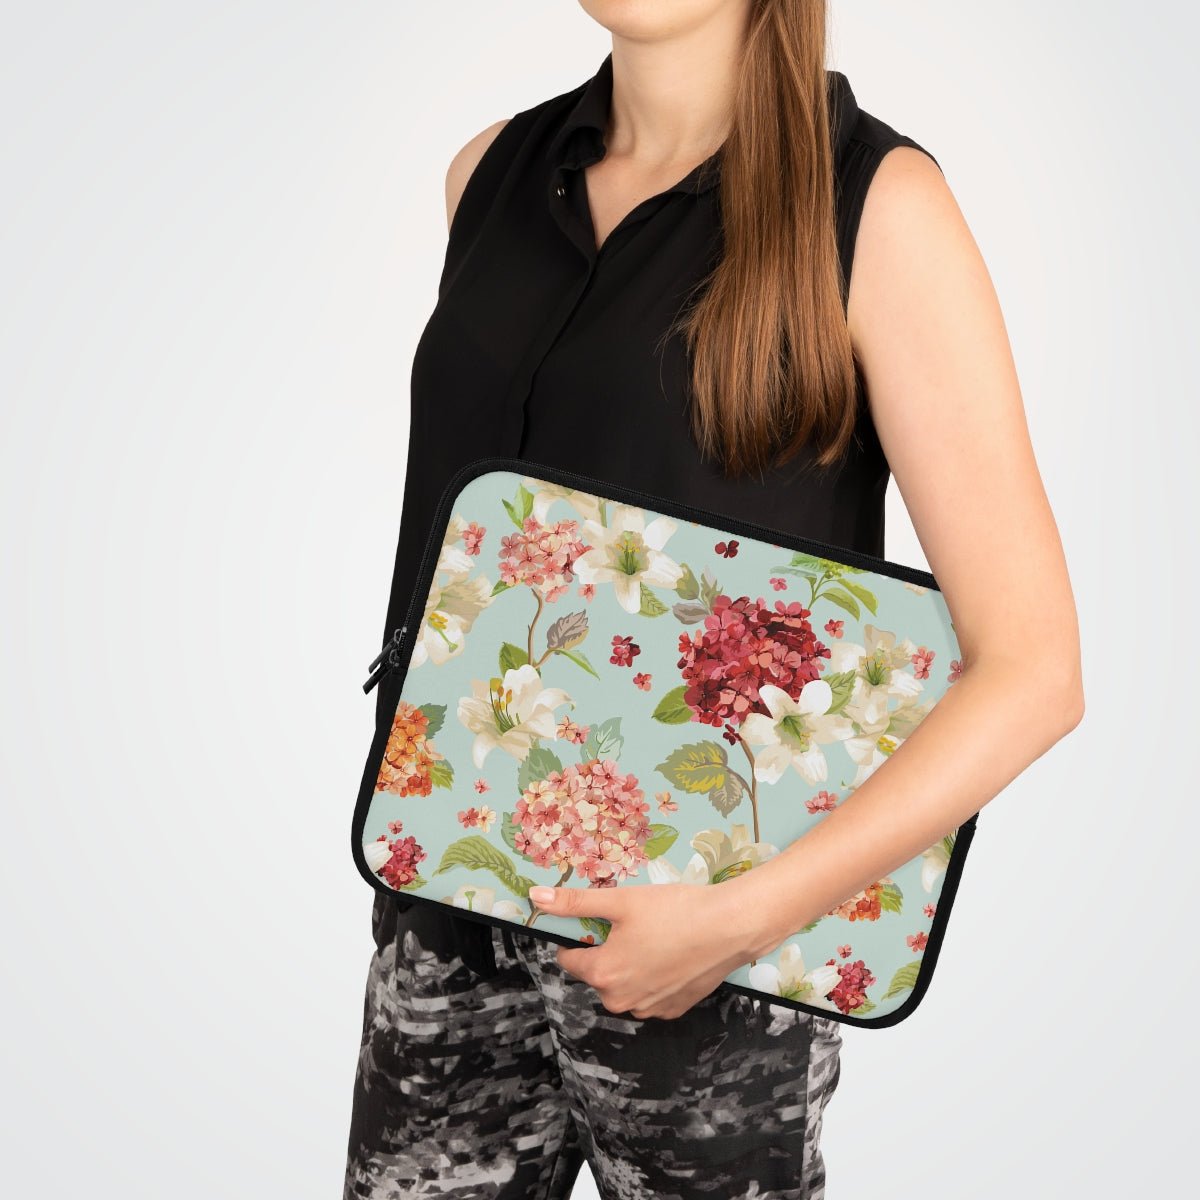 Autumn Hortensia and Lily Flowers Laptop Sleeve - Puffin Lime